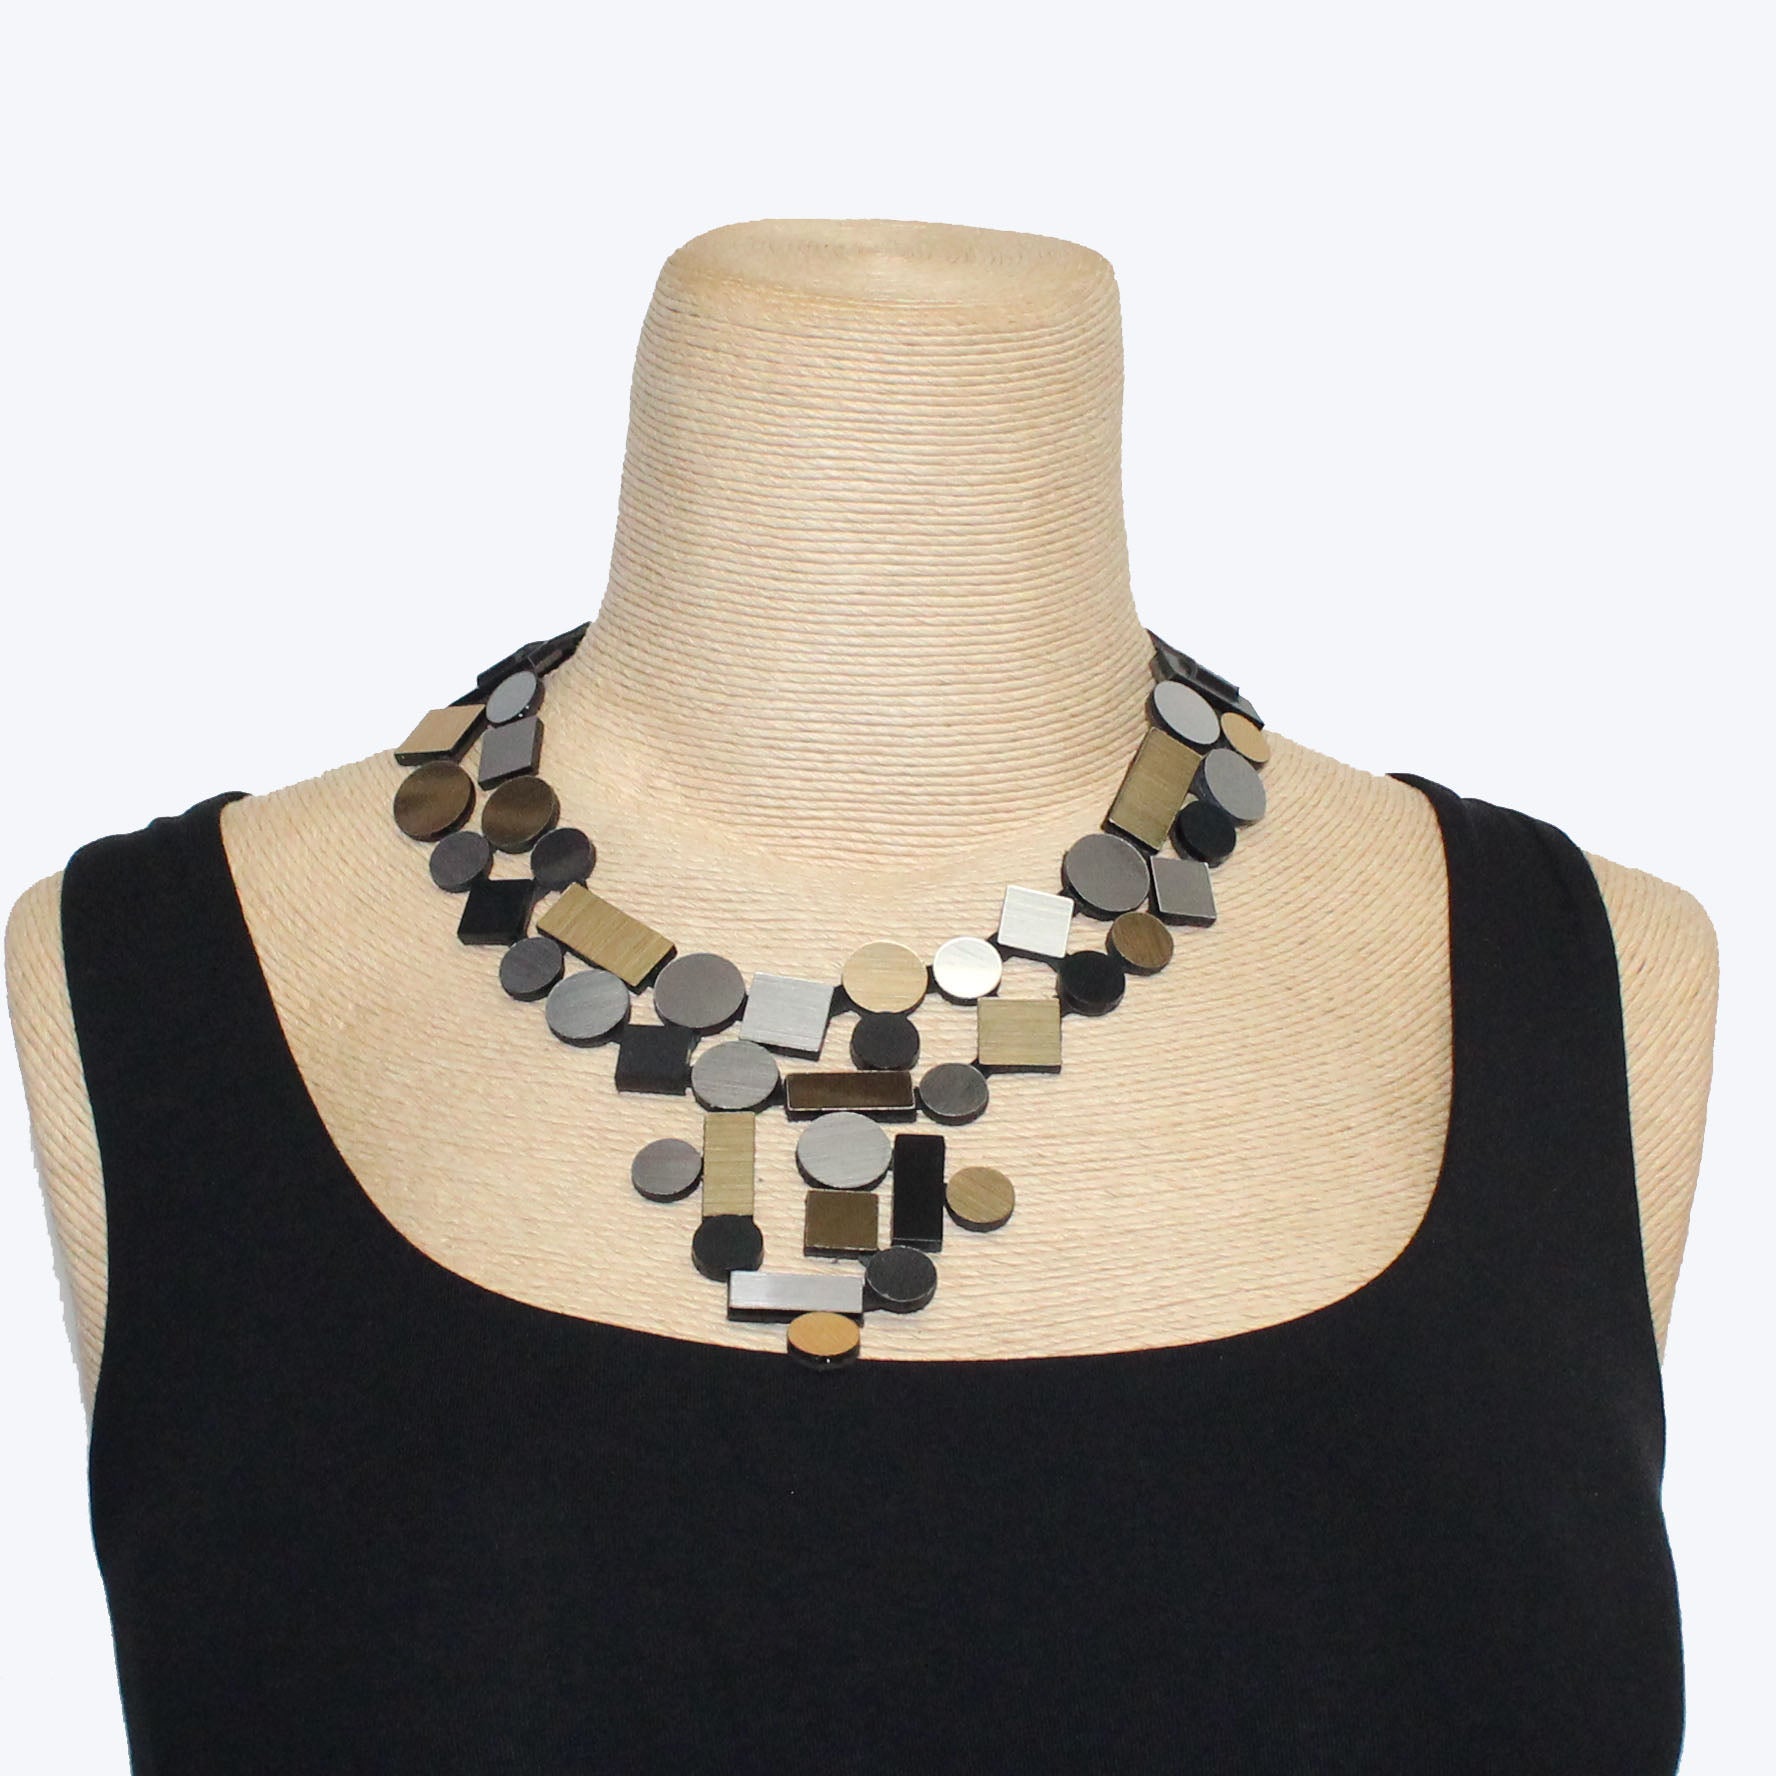 Iskin Sisters Necklace, Bauhaus V Exclusive, Gold/Silver/Black